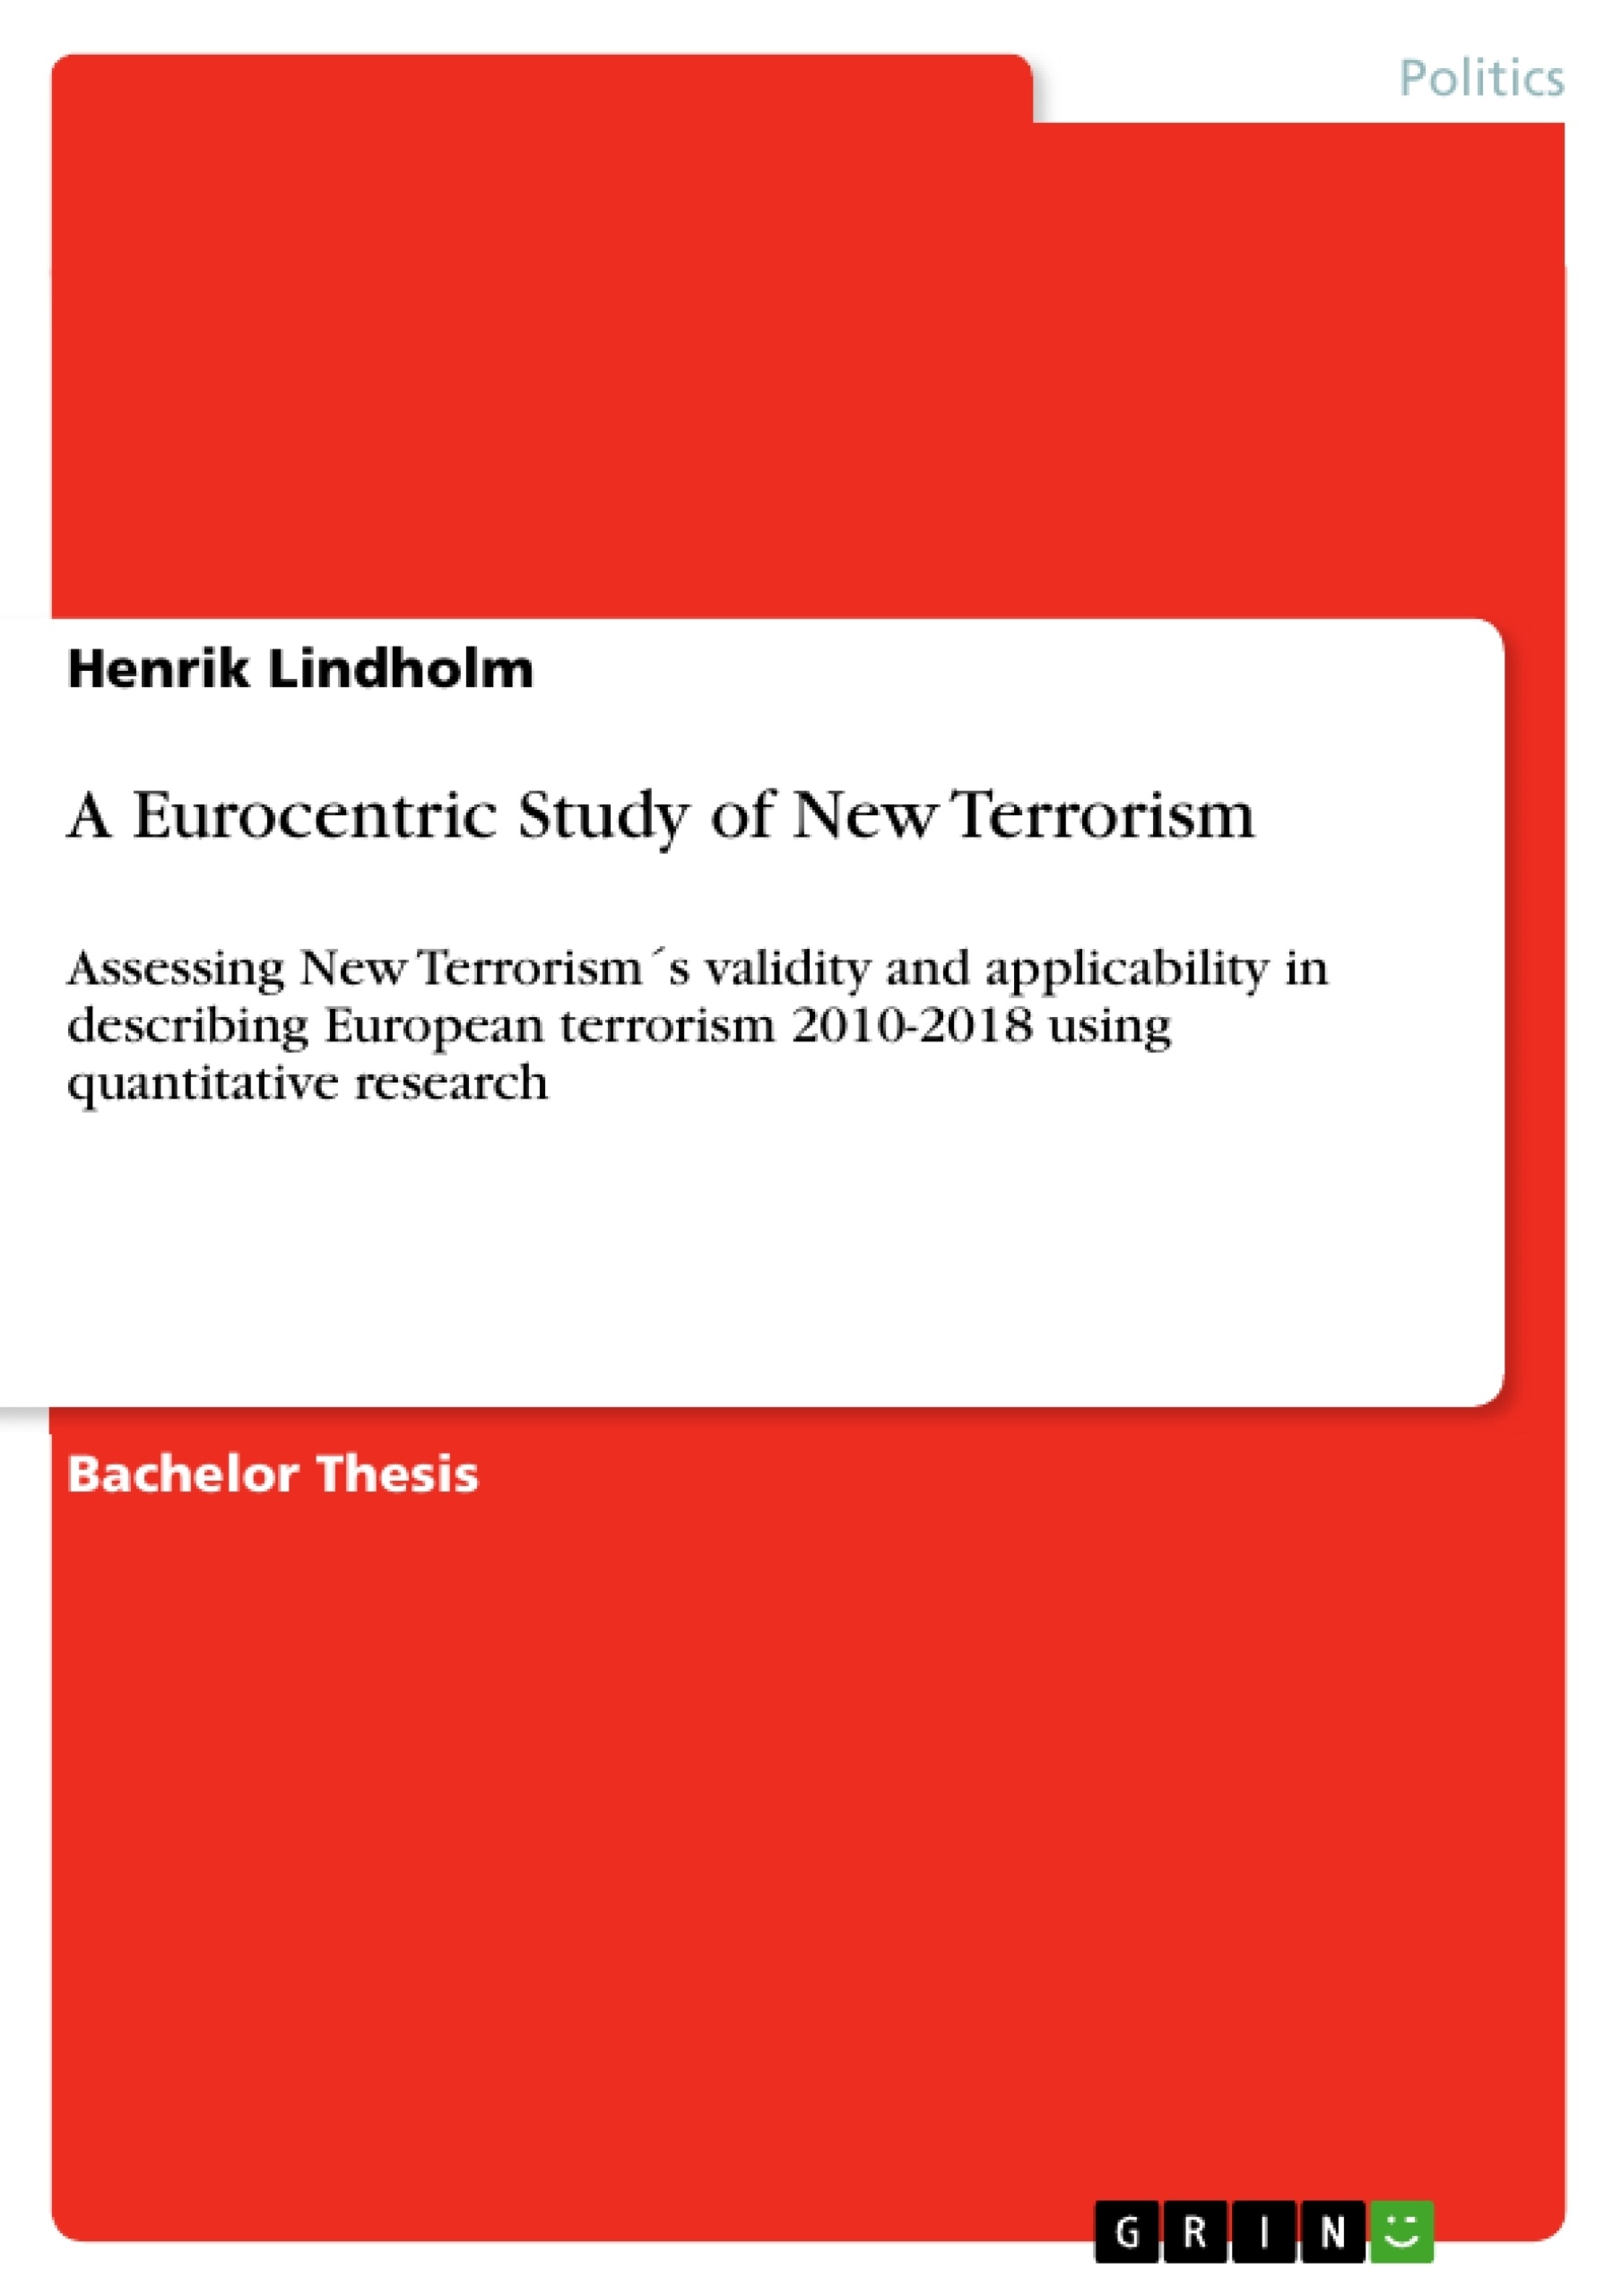 Título: A Eurocentric Study of New Terrorism